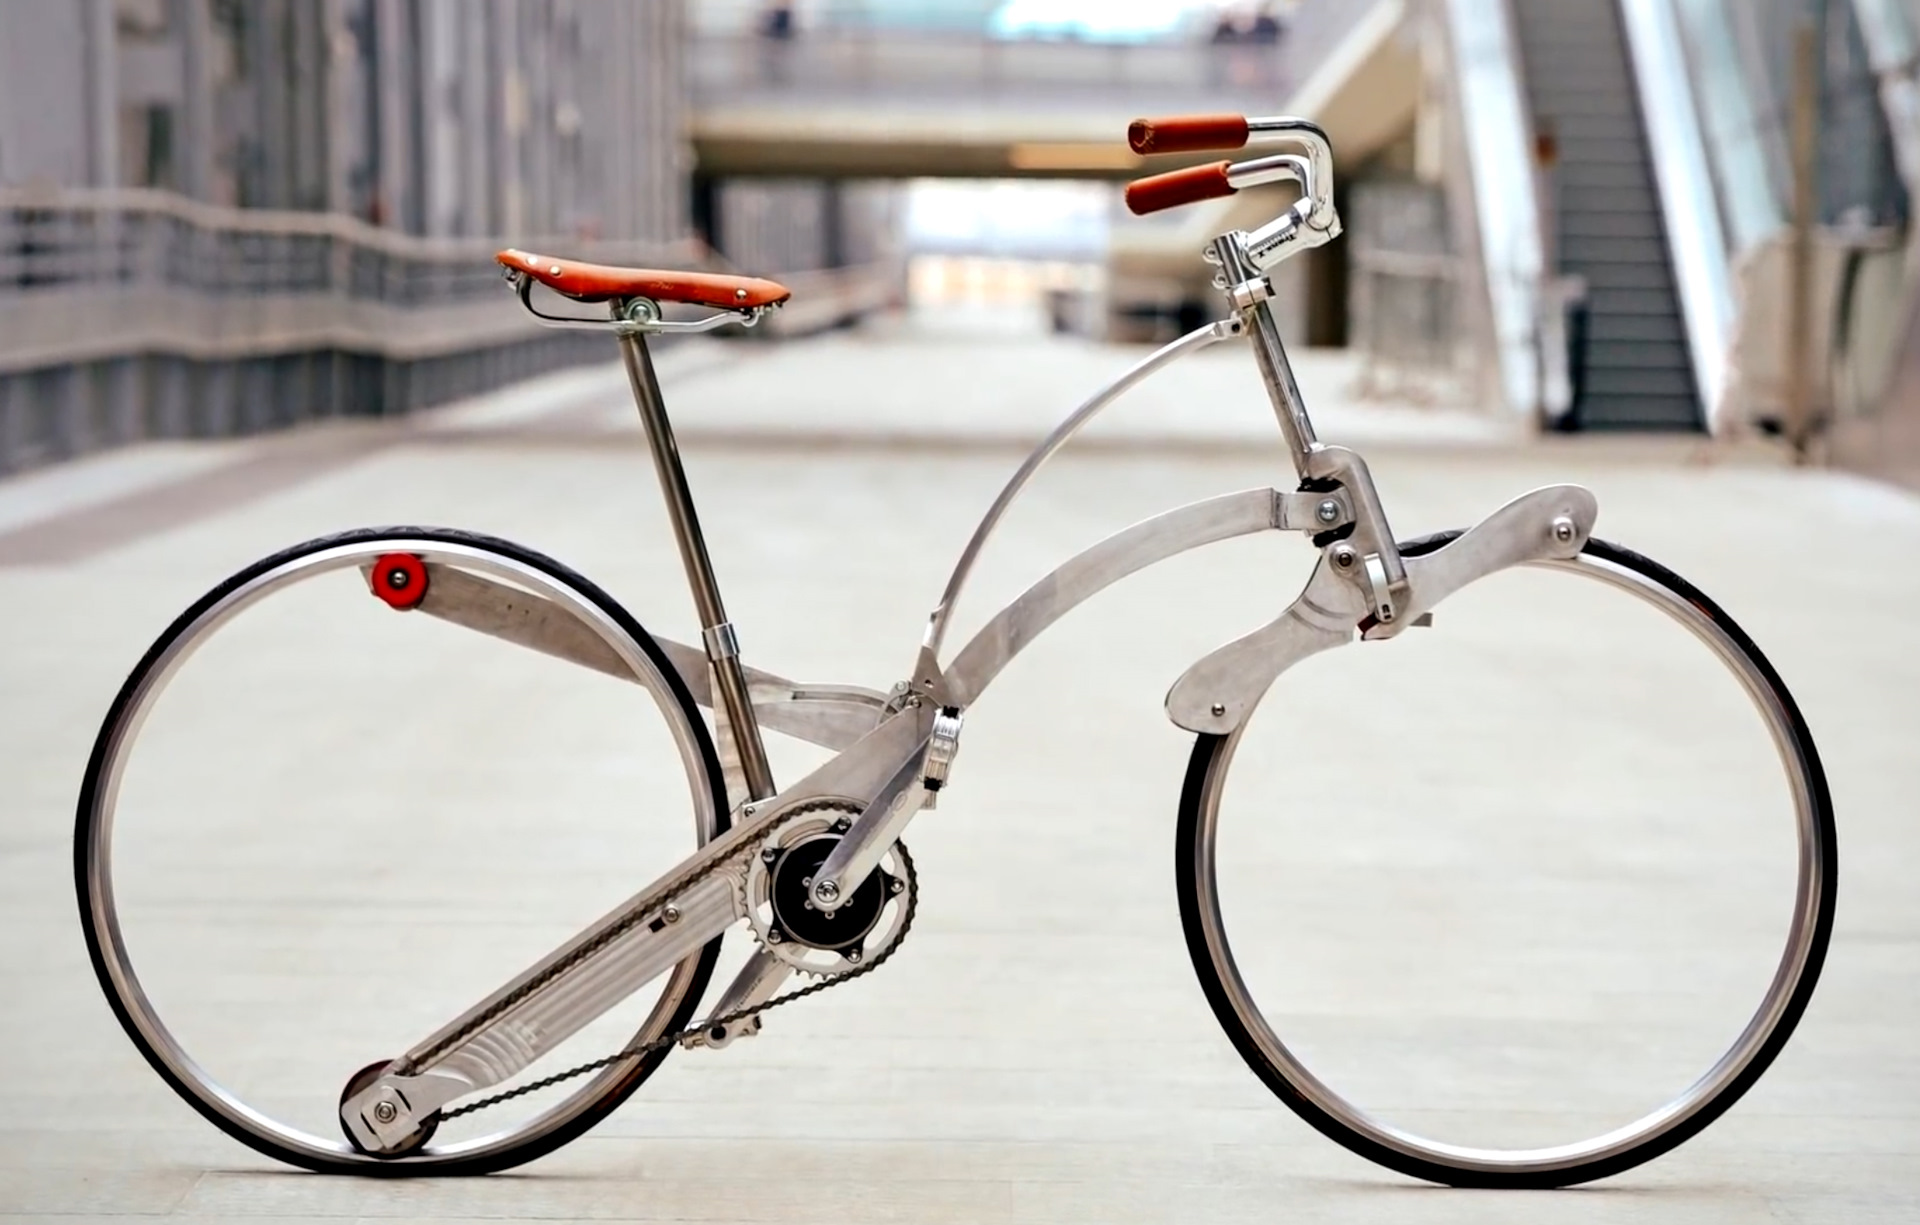 DIY Projects for Bicycles and Motorcycles: From Restoration to Customization